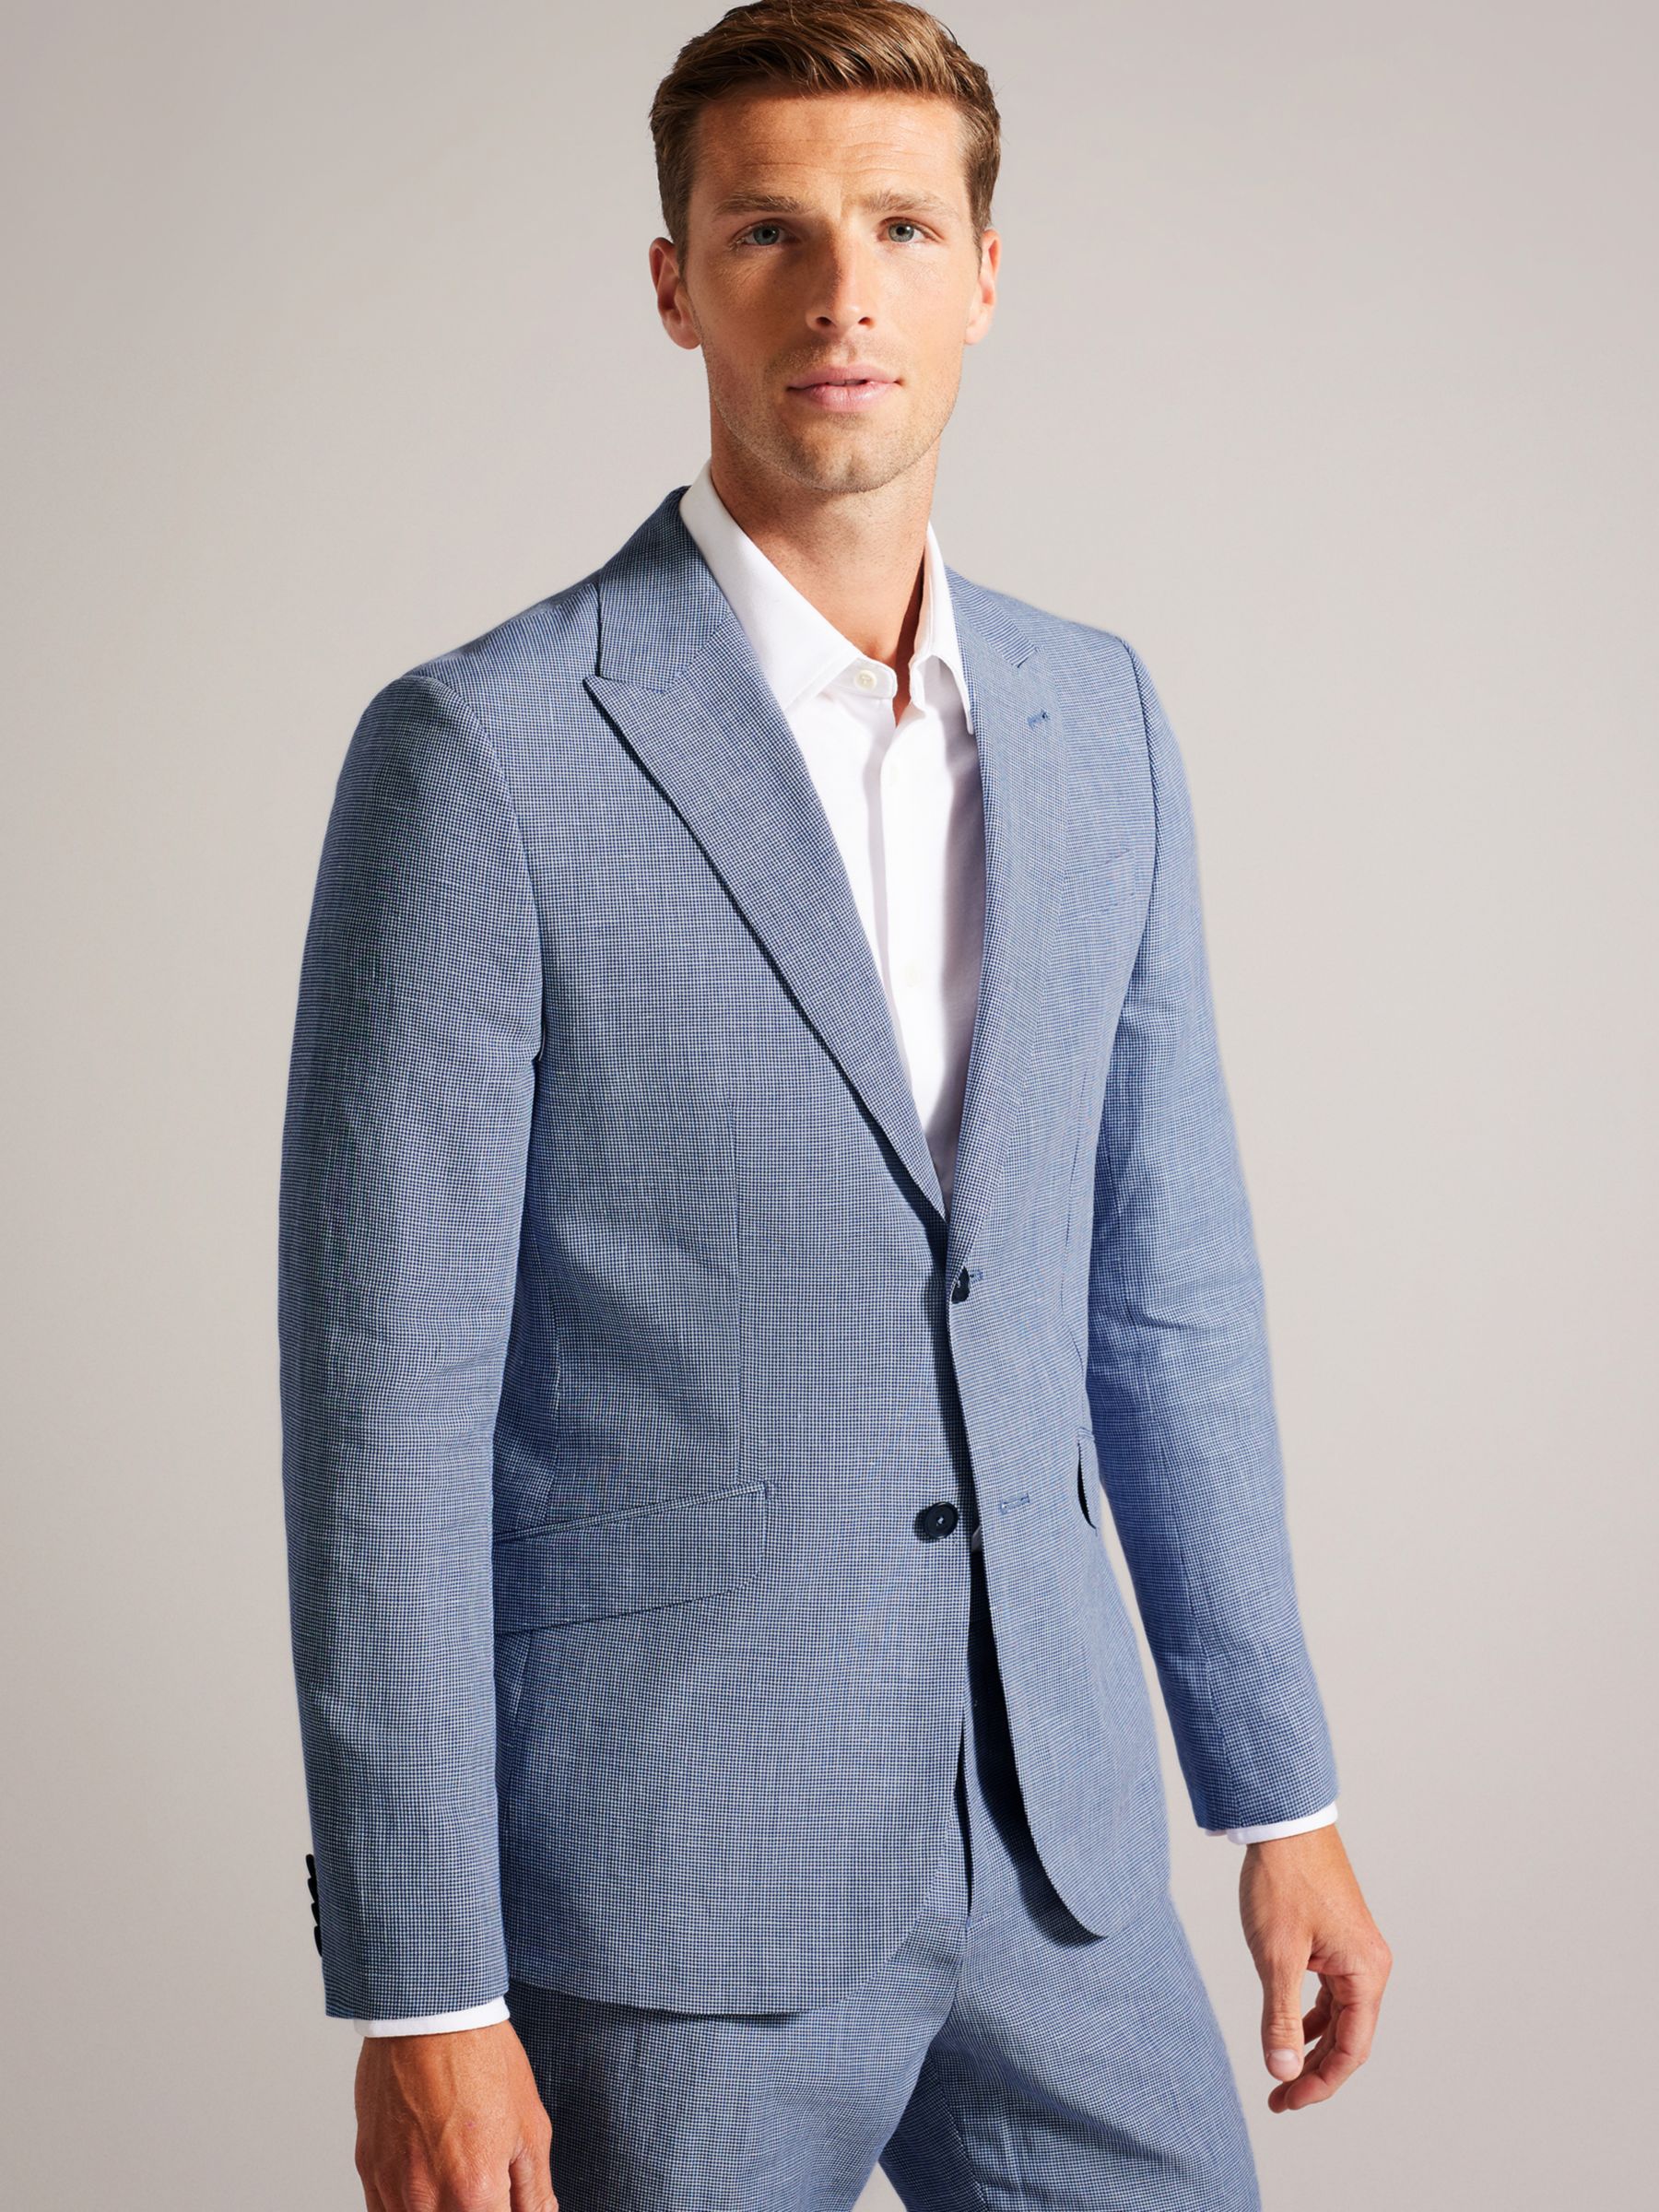 Ted Baker Slim Fit Puppytooth Suit Jacket, Blue